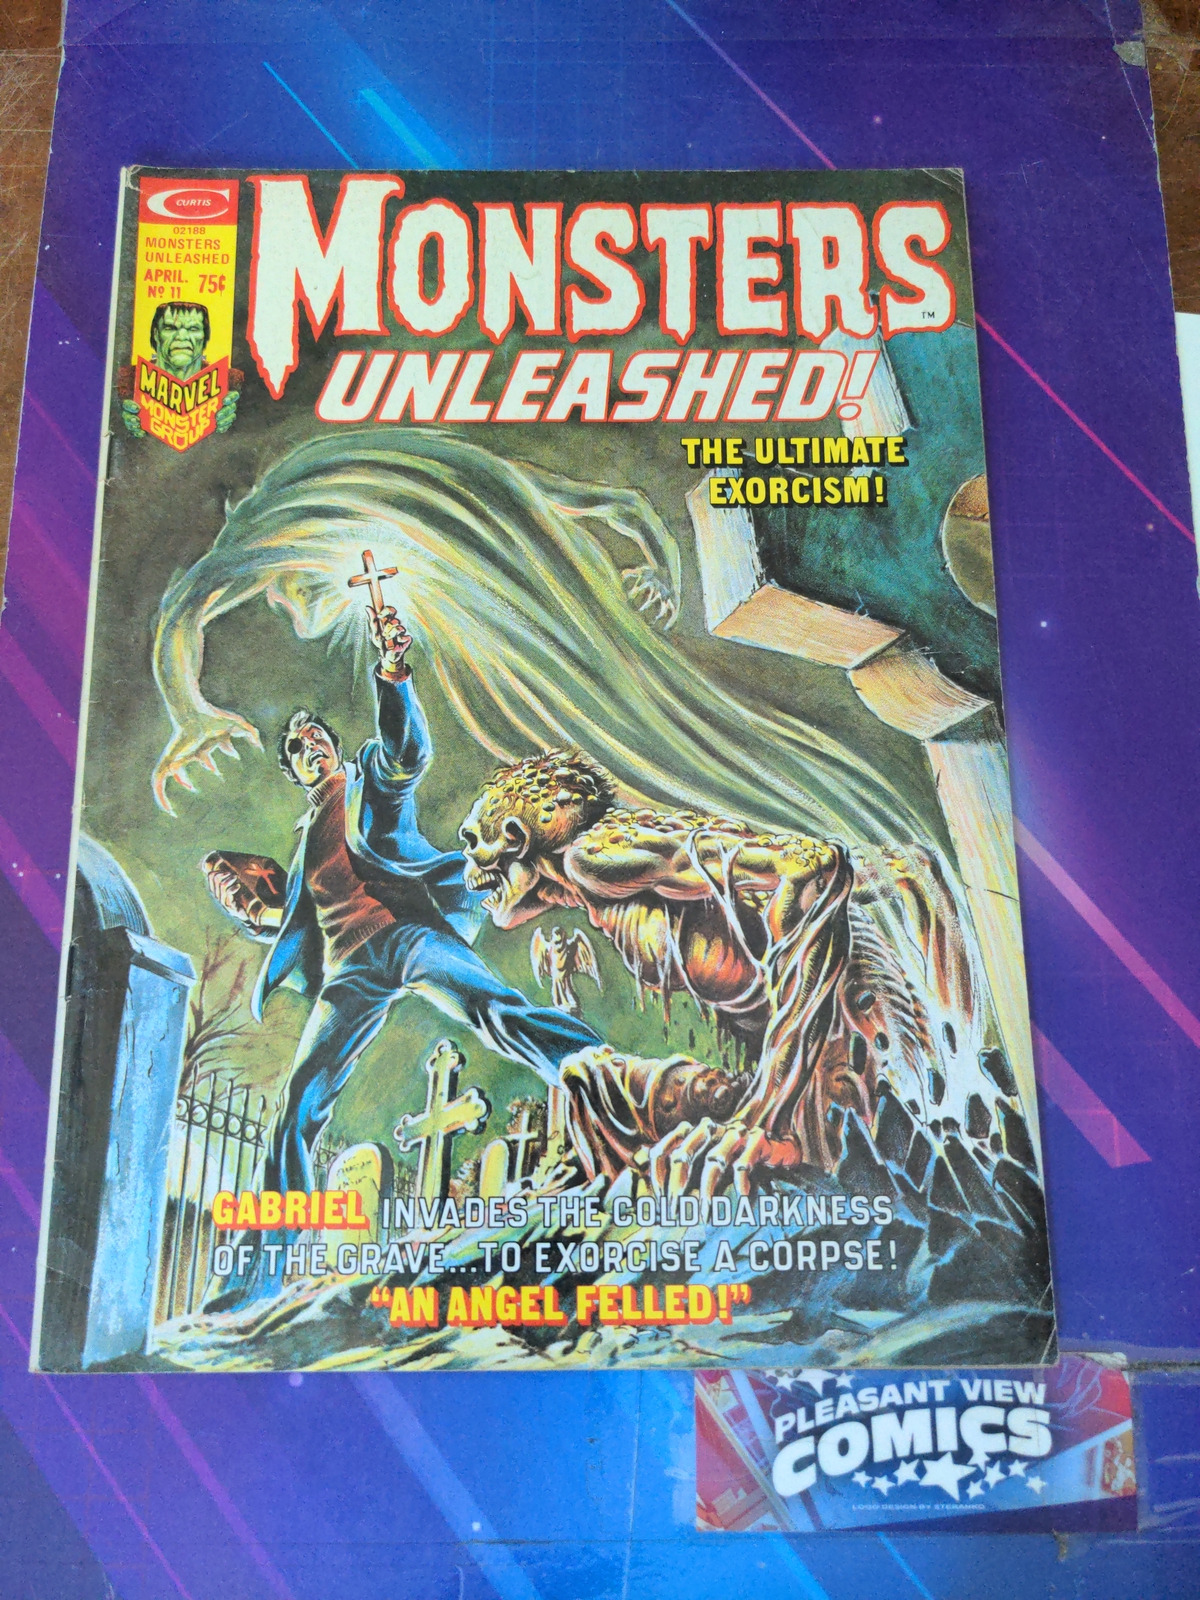 MONSTERS UNLEASHED #11 VOL. 1 7.0 1ST APP CURTIS COMIC INC COMIC BOOK MG6-13